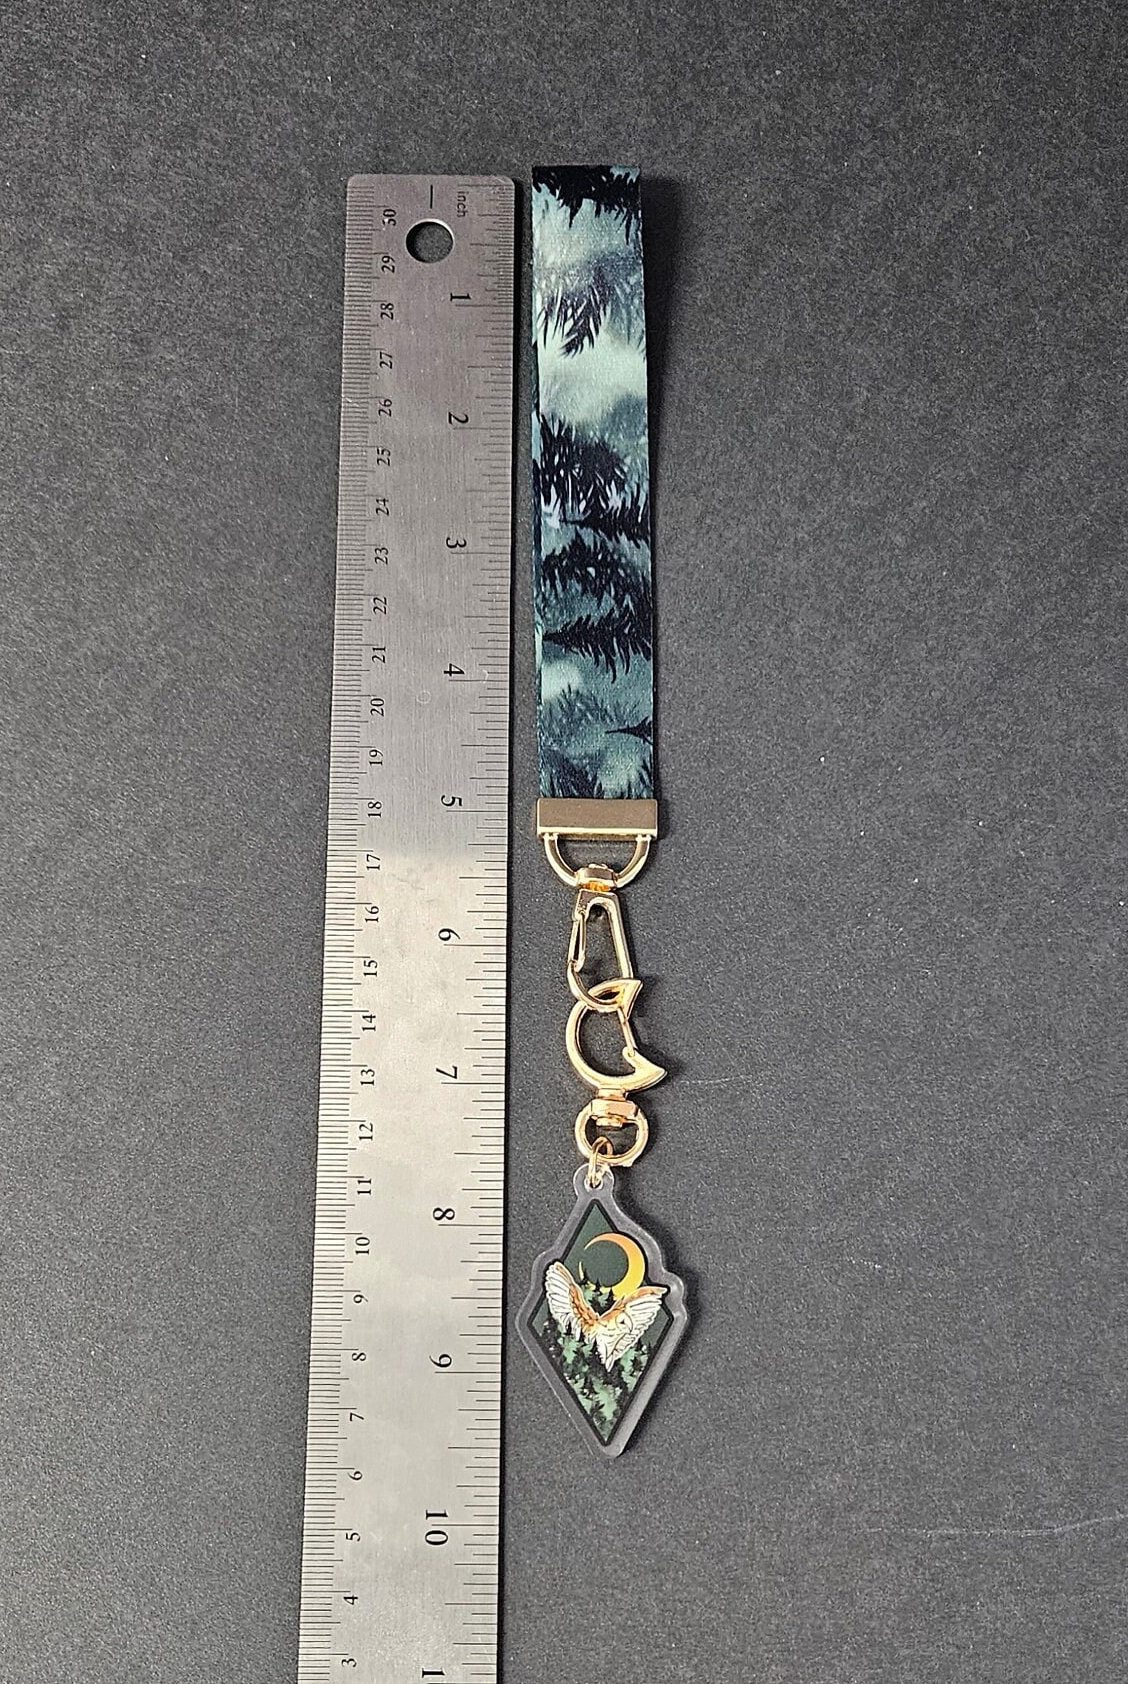 WRISTLET with Double Sided Charm: Dark Forest Barn Owl , Dark Forest Barn Owl Charm , Dark Forest Barn Owl Lanyard , Owl Accessory